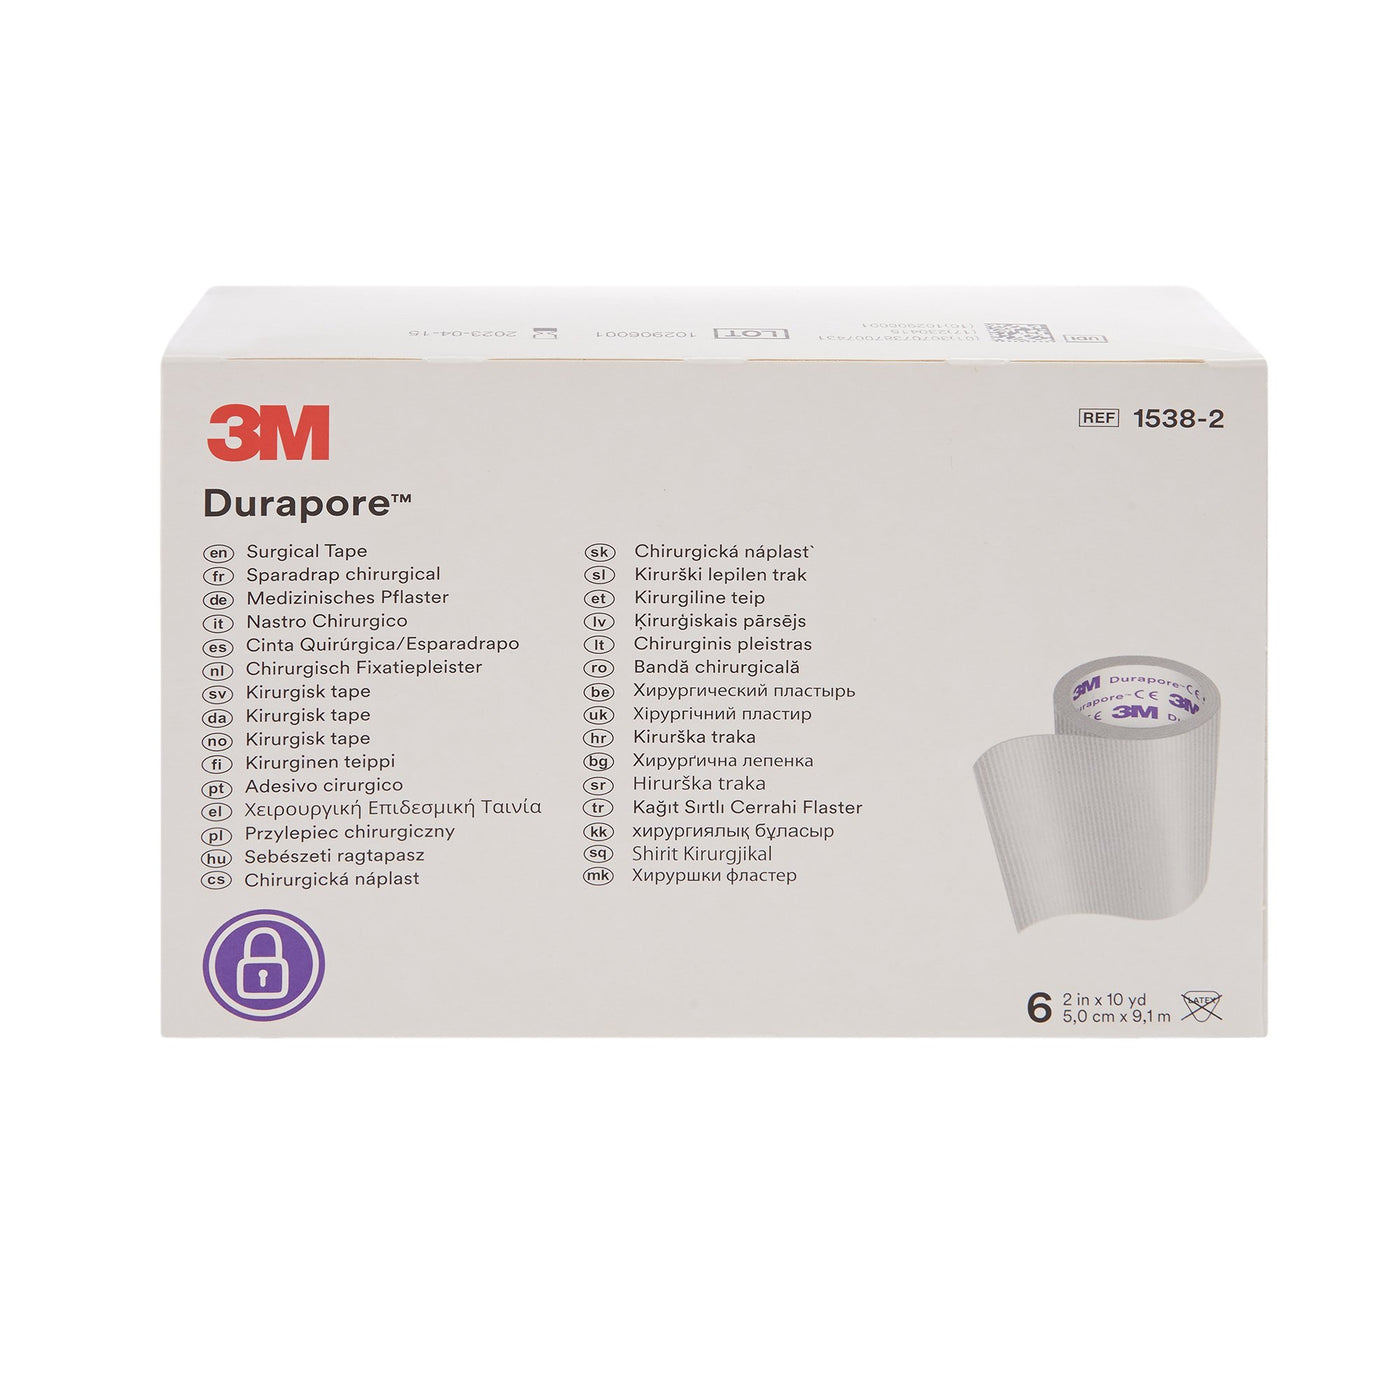 3M Surgical Tape Box